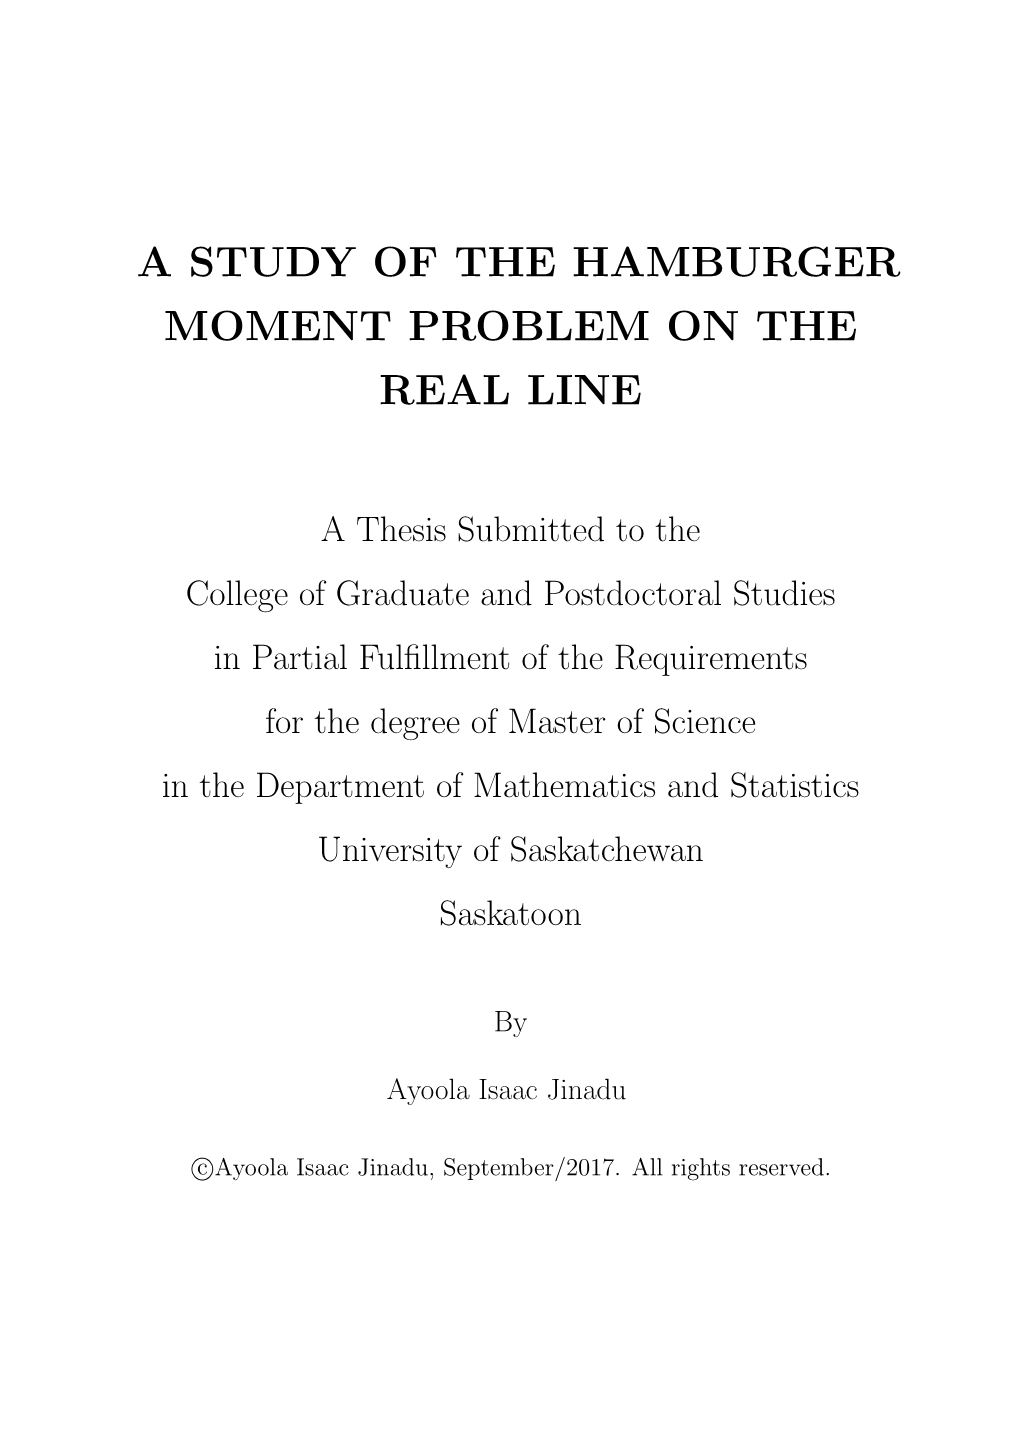 A Study of the Hamburger Moment Problem on the Real Line